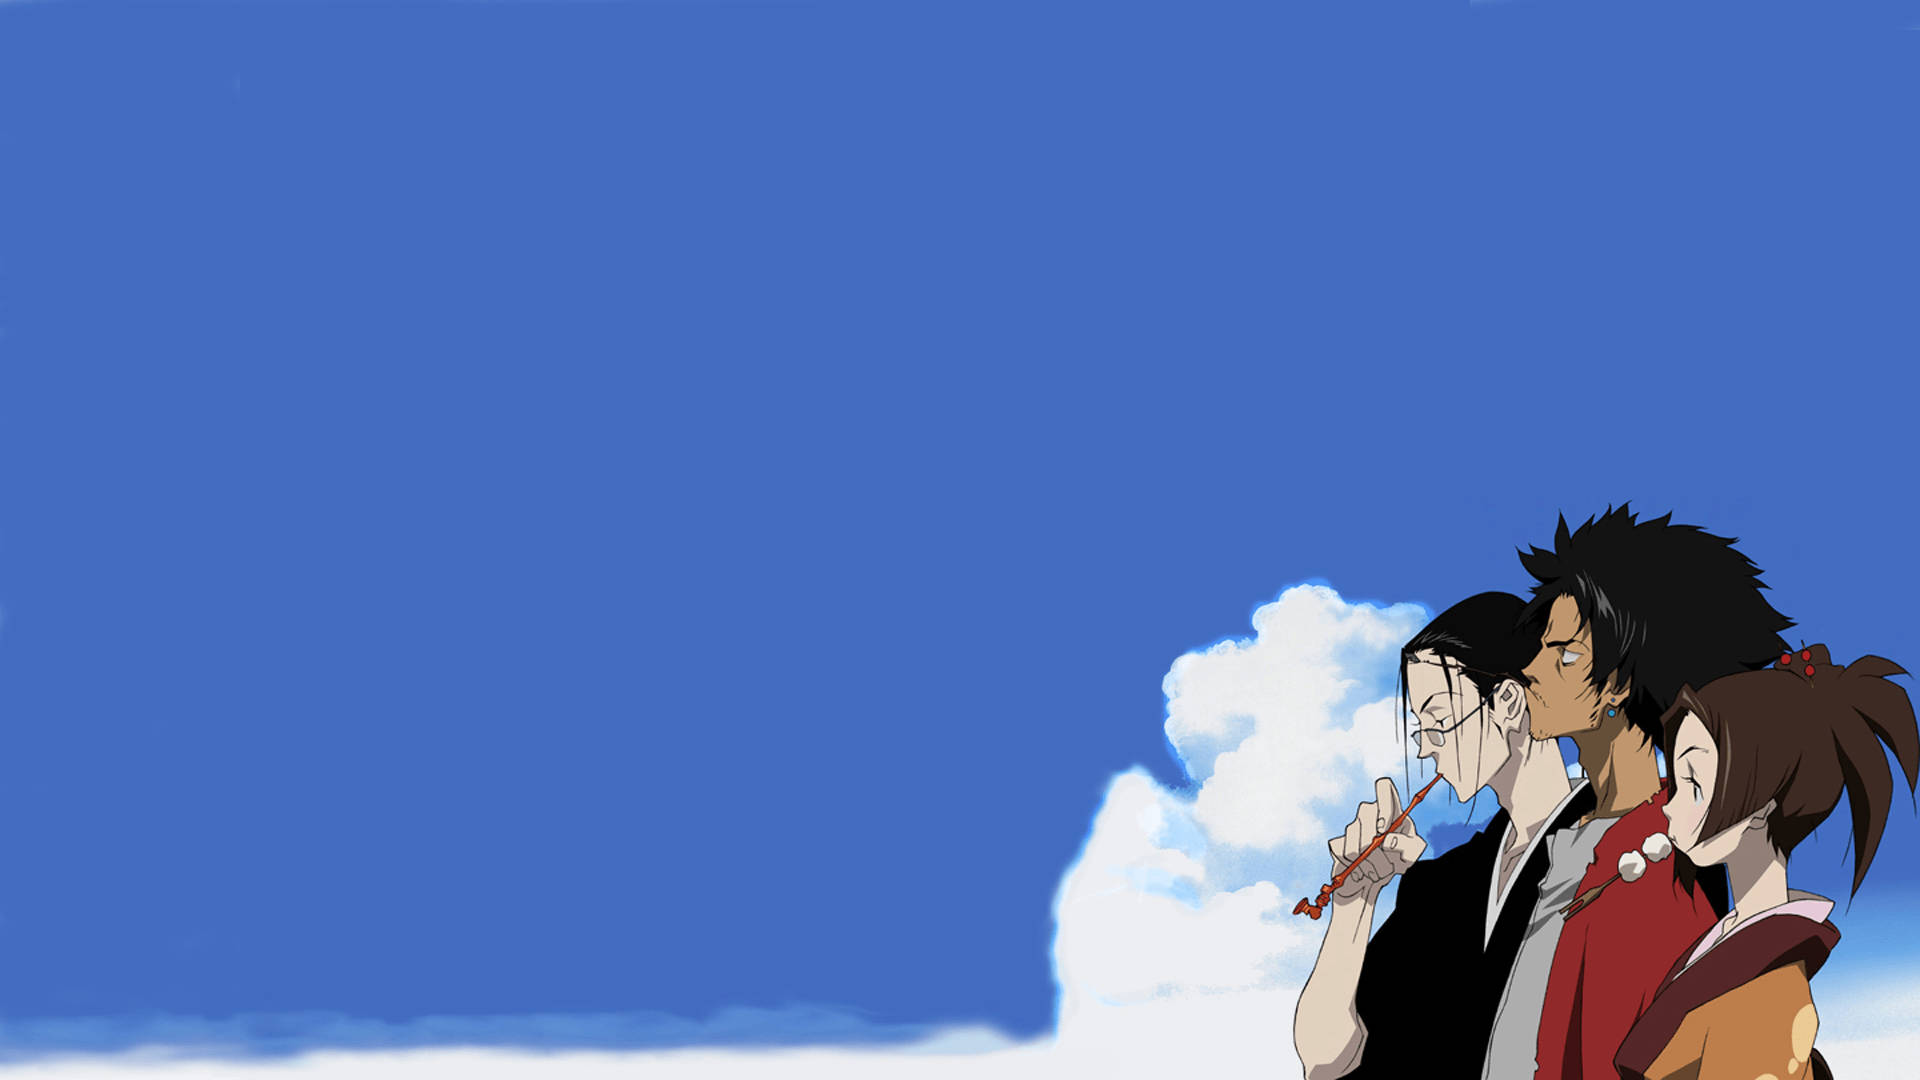 The main characters of Samurai Champloo, Mugen, Jin, and Fuu, standing together against a blue sky backdrop. Wallpaper